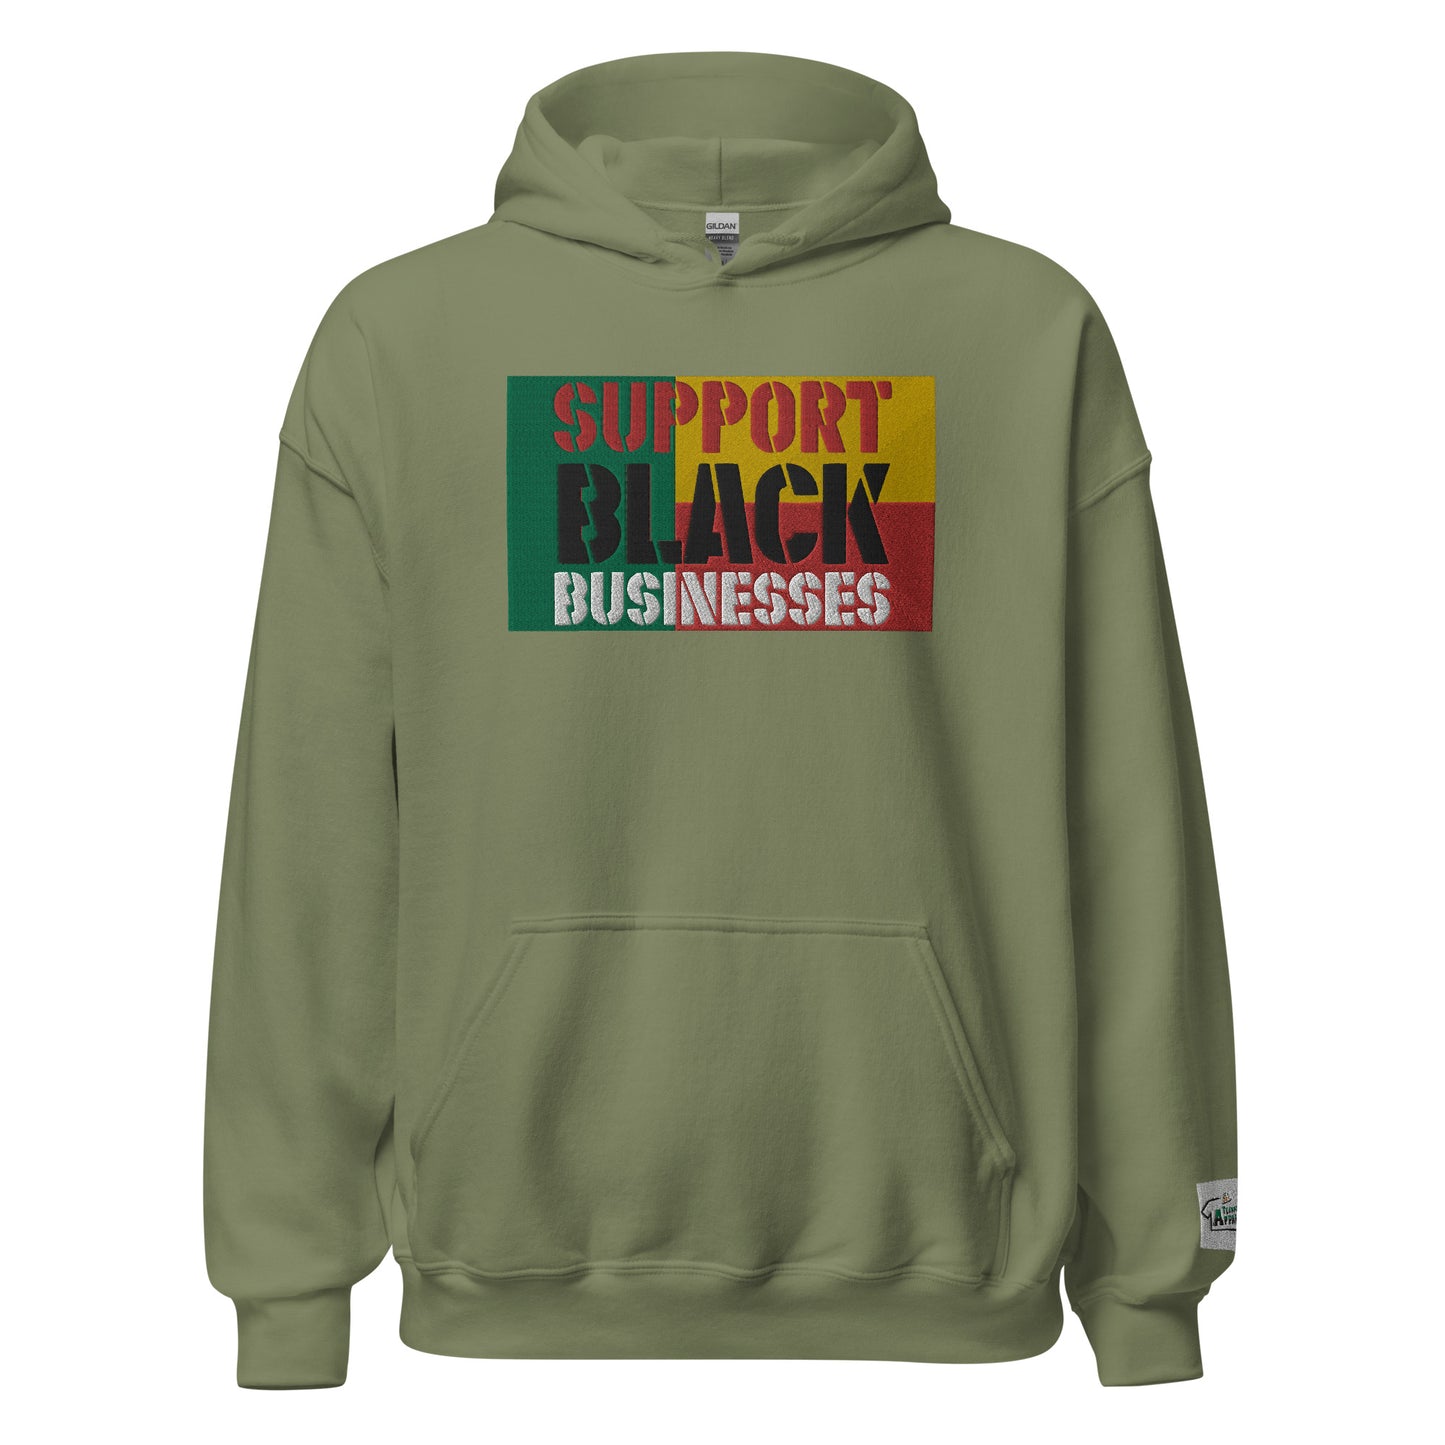 Support Black Businesses Hoodie by Teammate Apparel